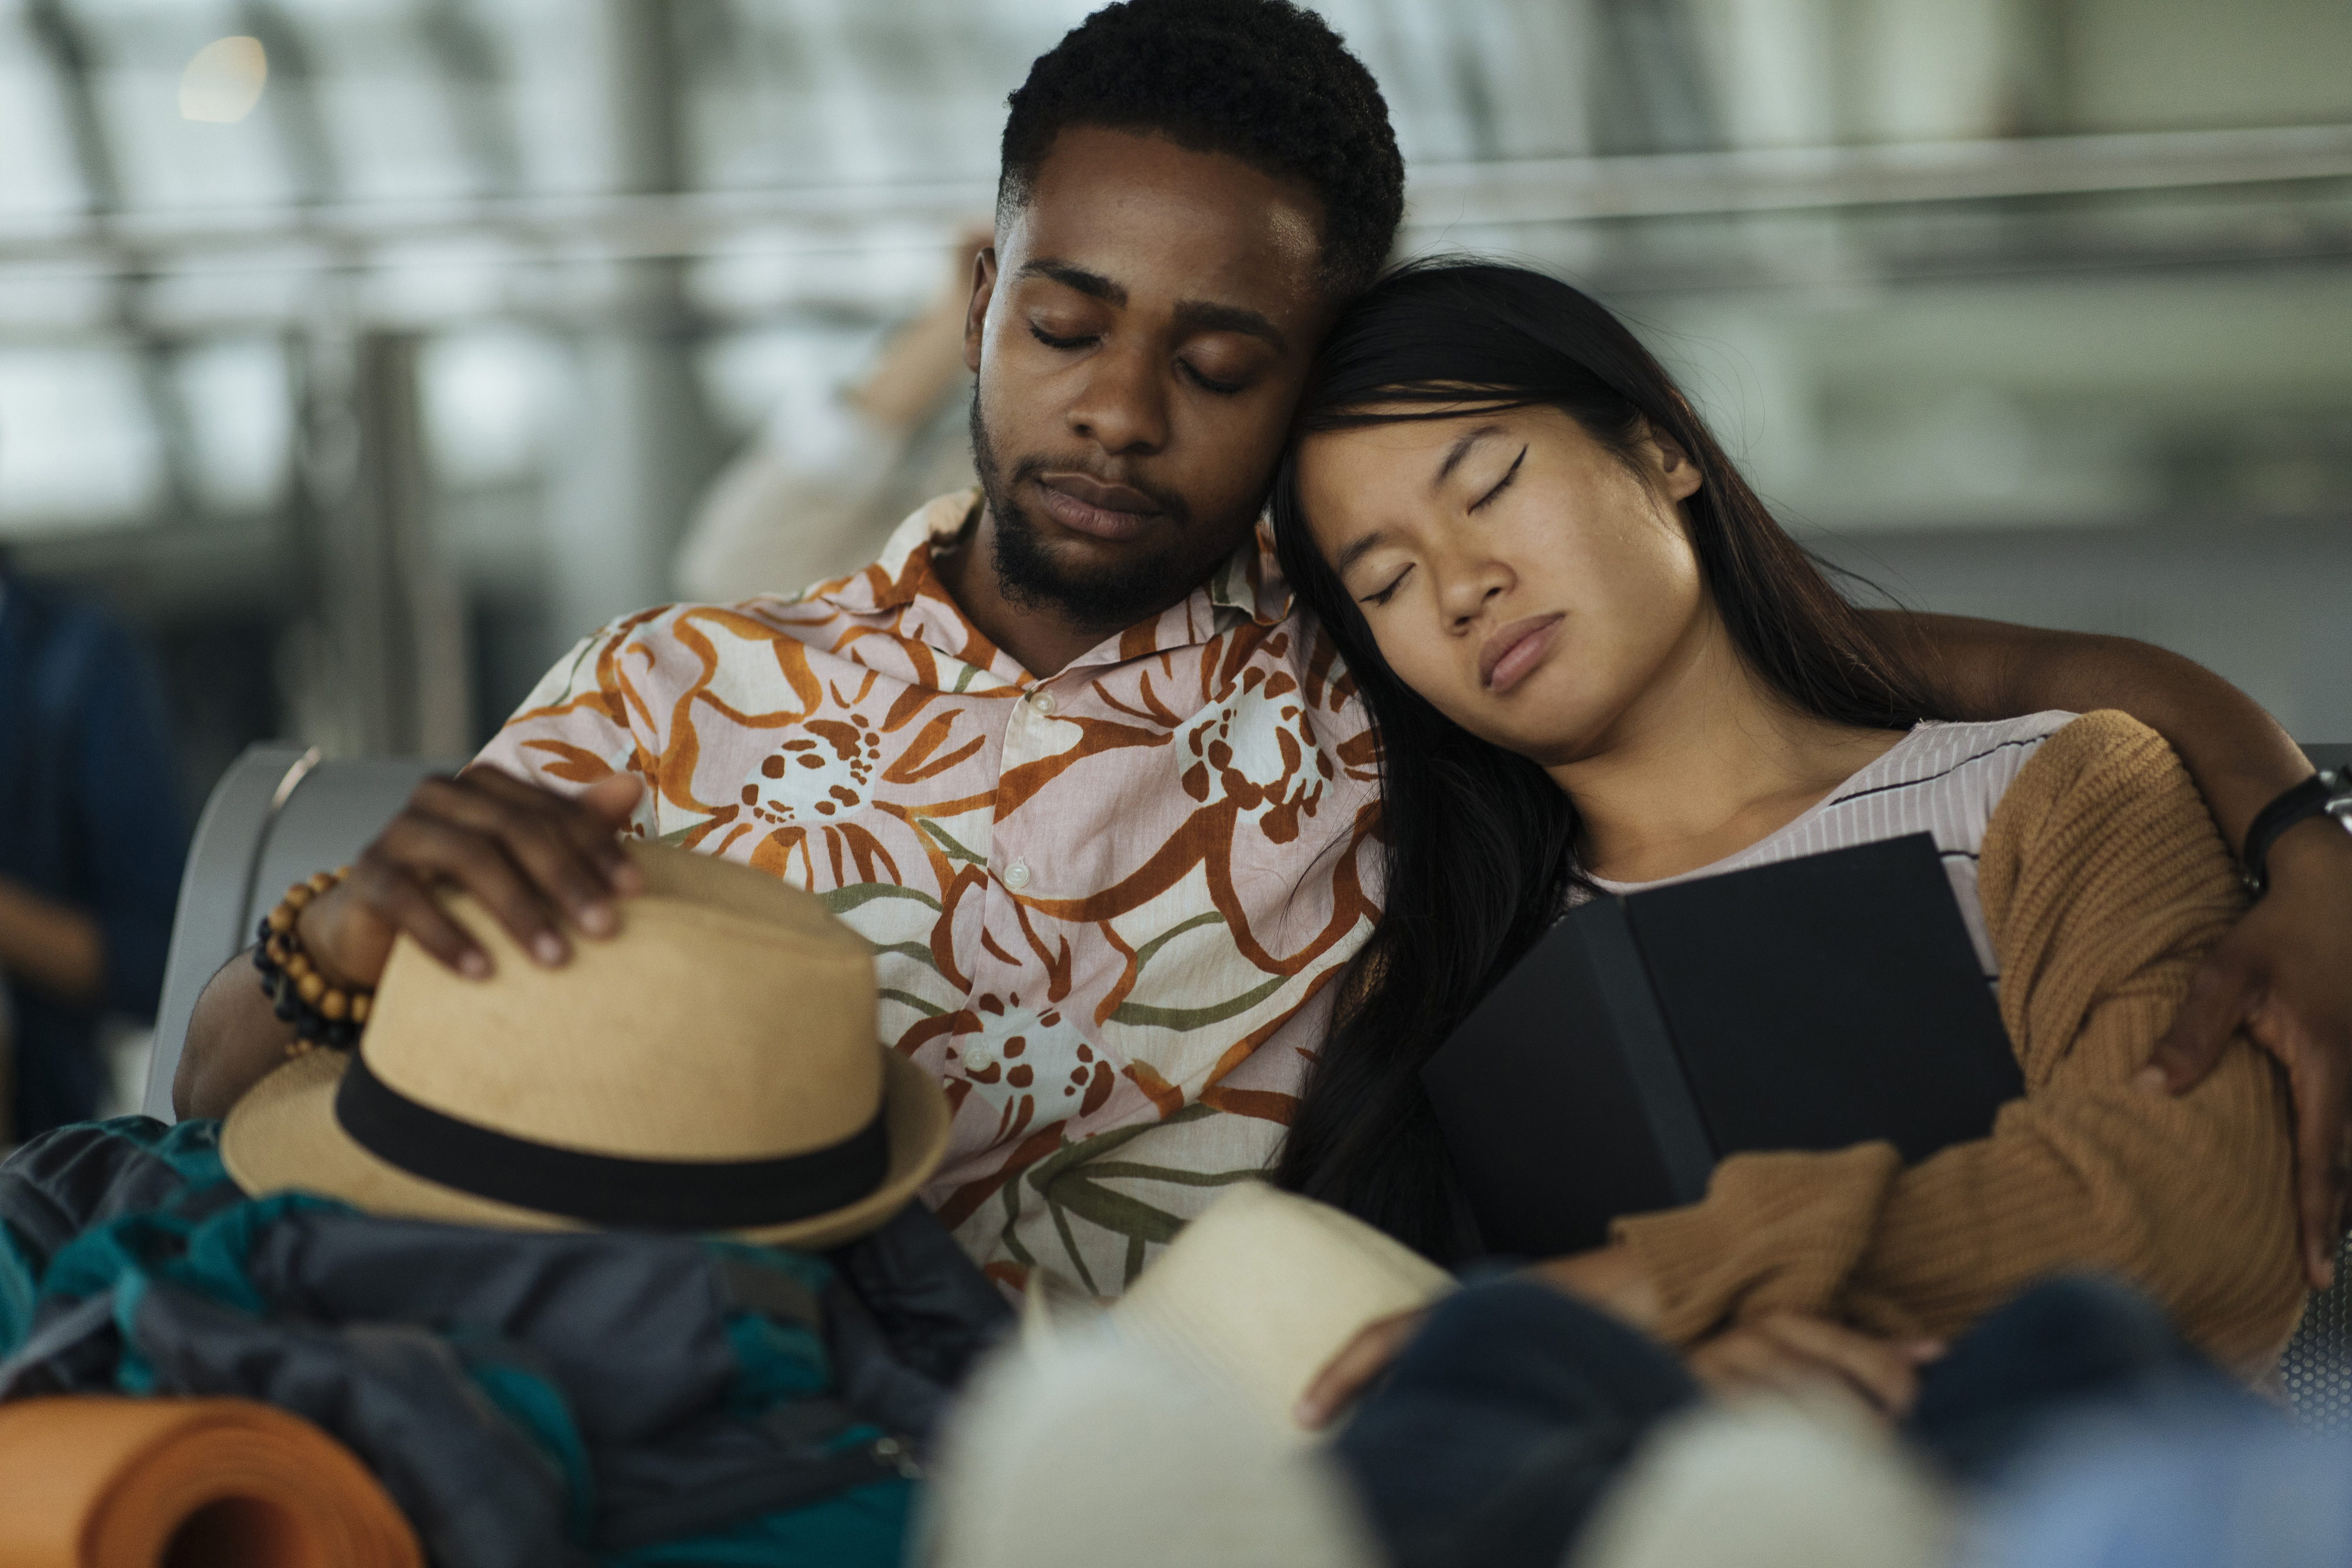 Two travelers rest against each other sleeping in an airport waiting area, surrounded by luggage